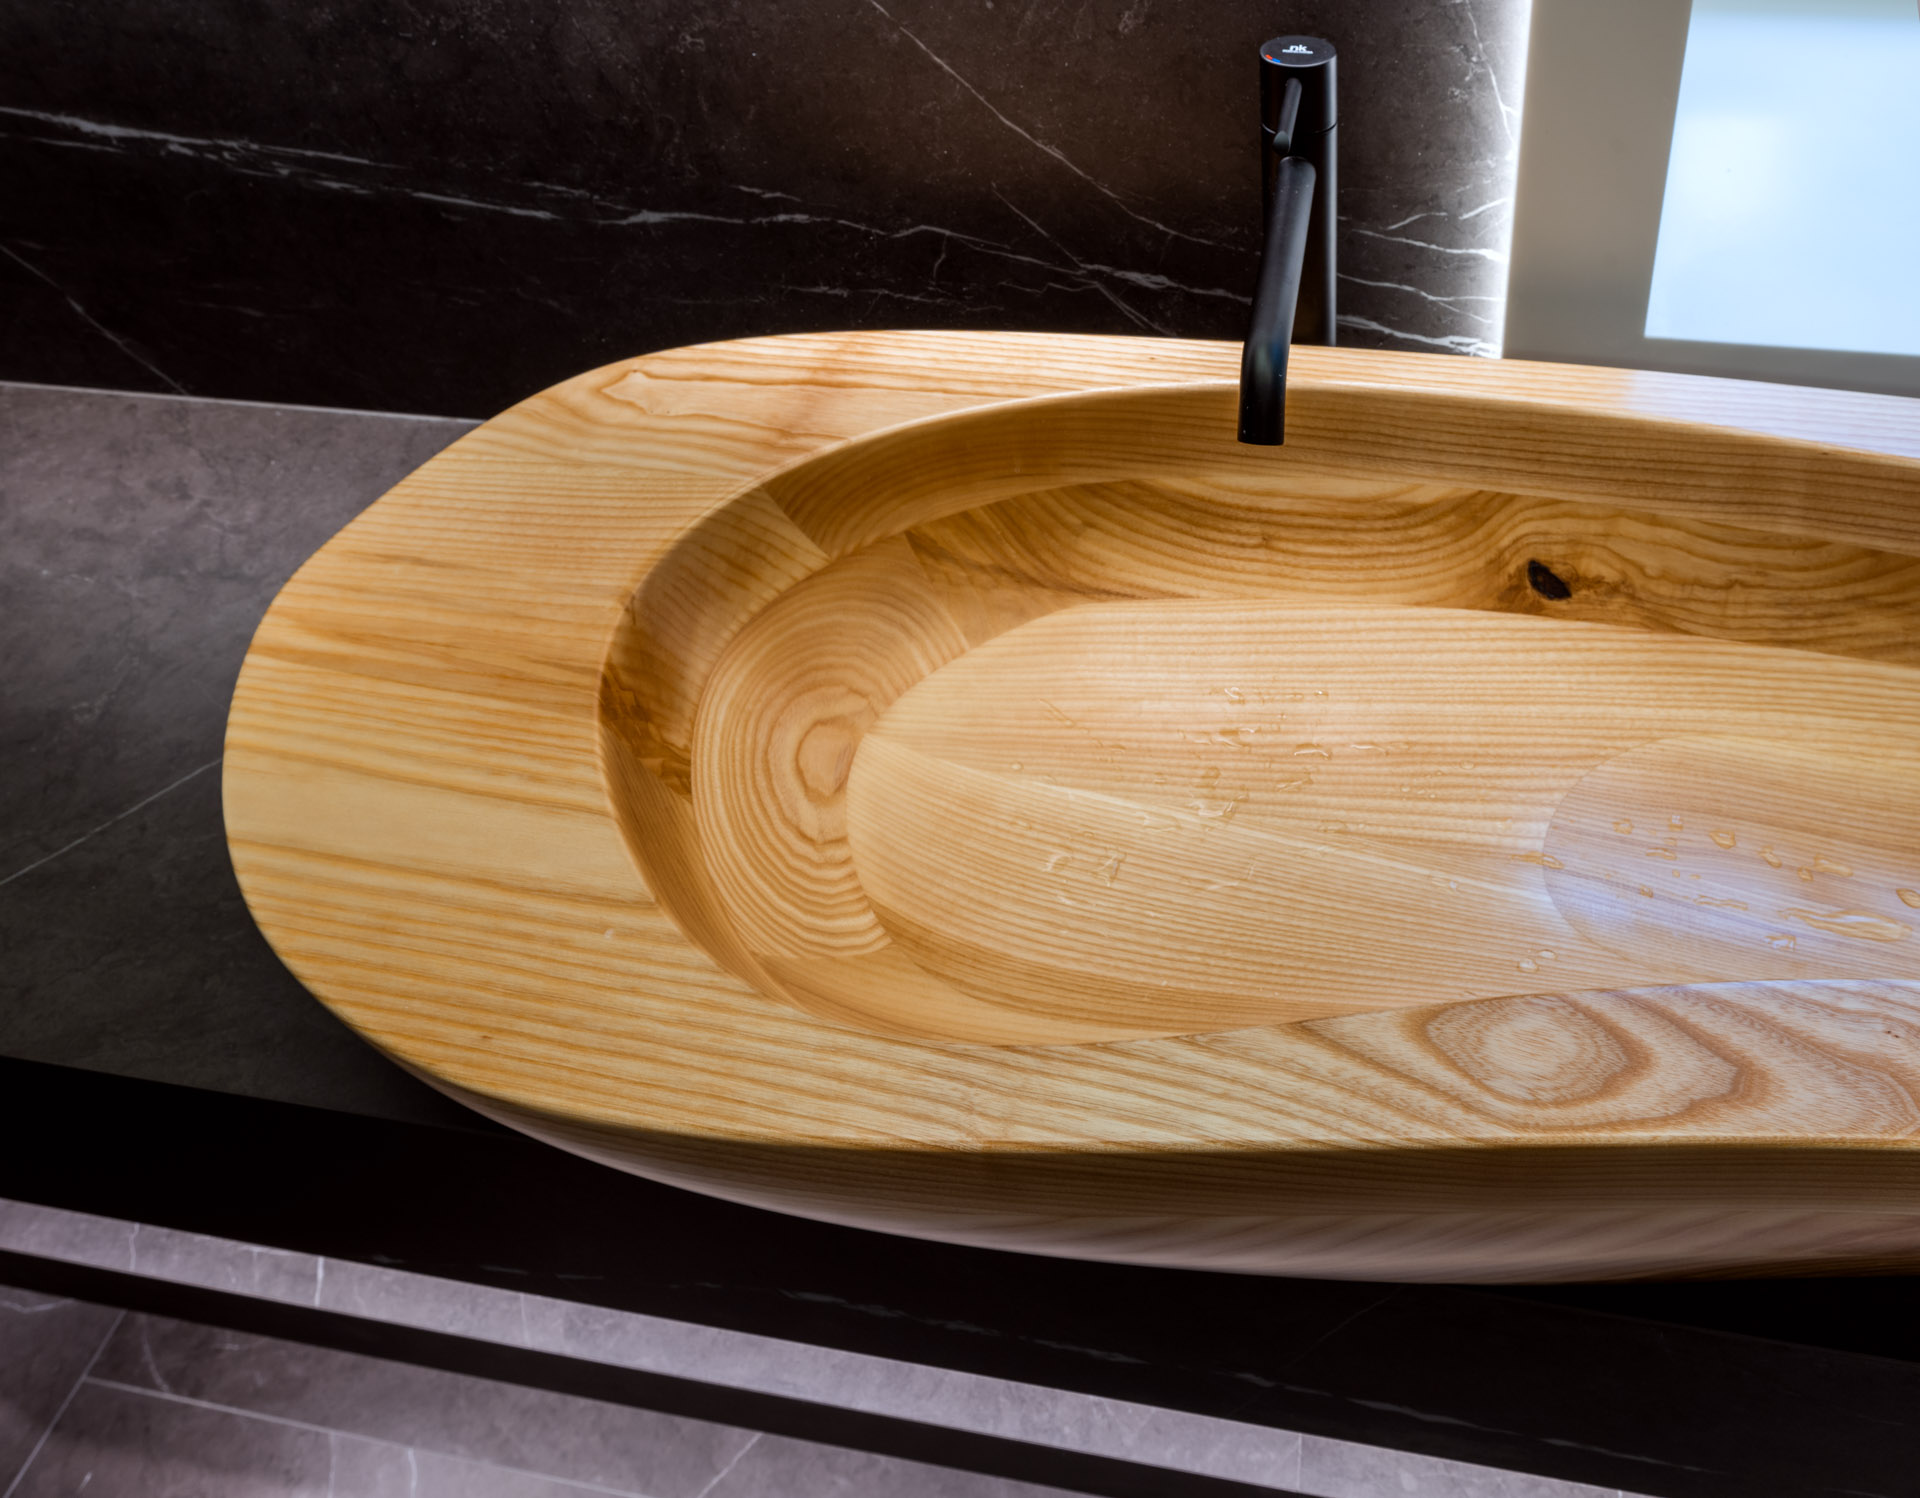 Image no. 6 of Custom bathtub and washbasin crafted in Ash wood - Defacto